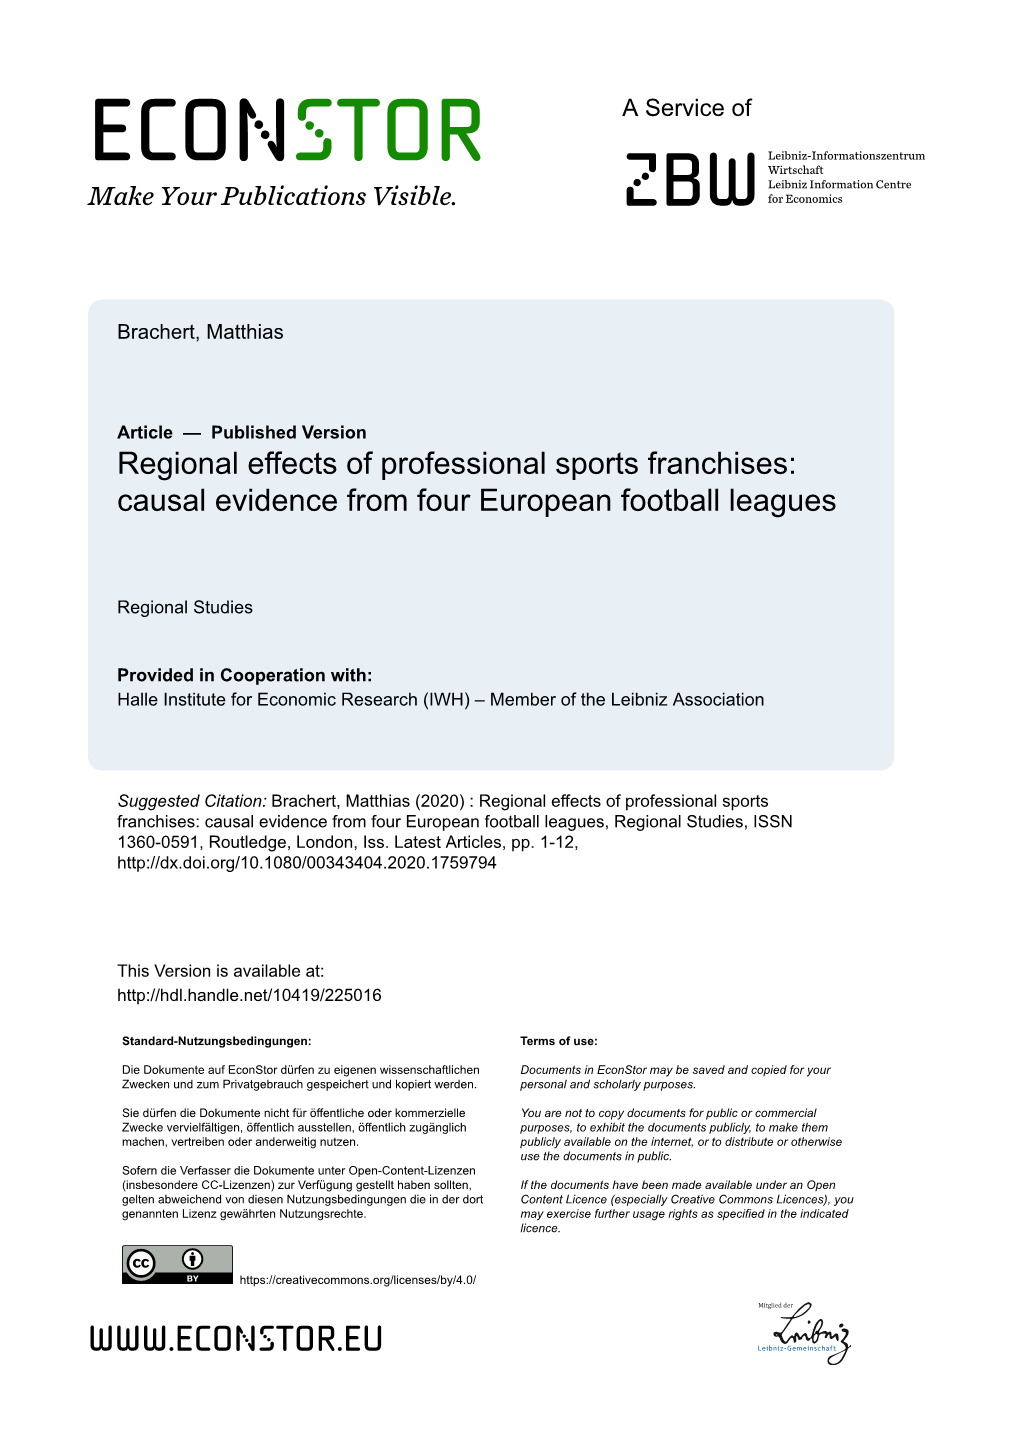 Regional Effects of Professional Sports Franchises: Causal Evidence from Four European Football Leagues